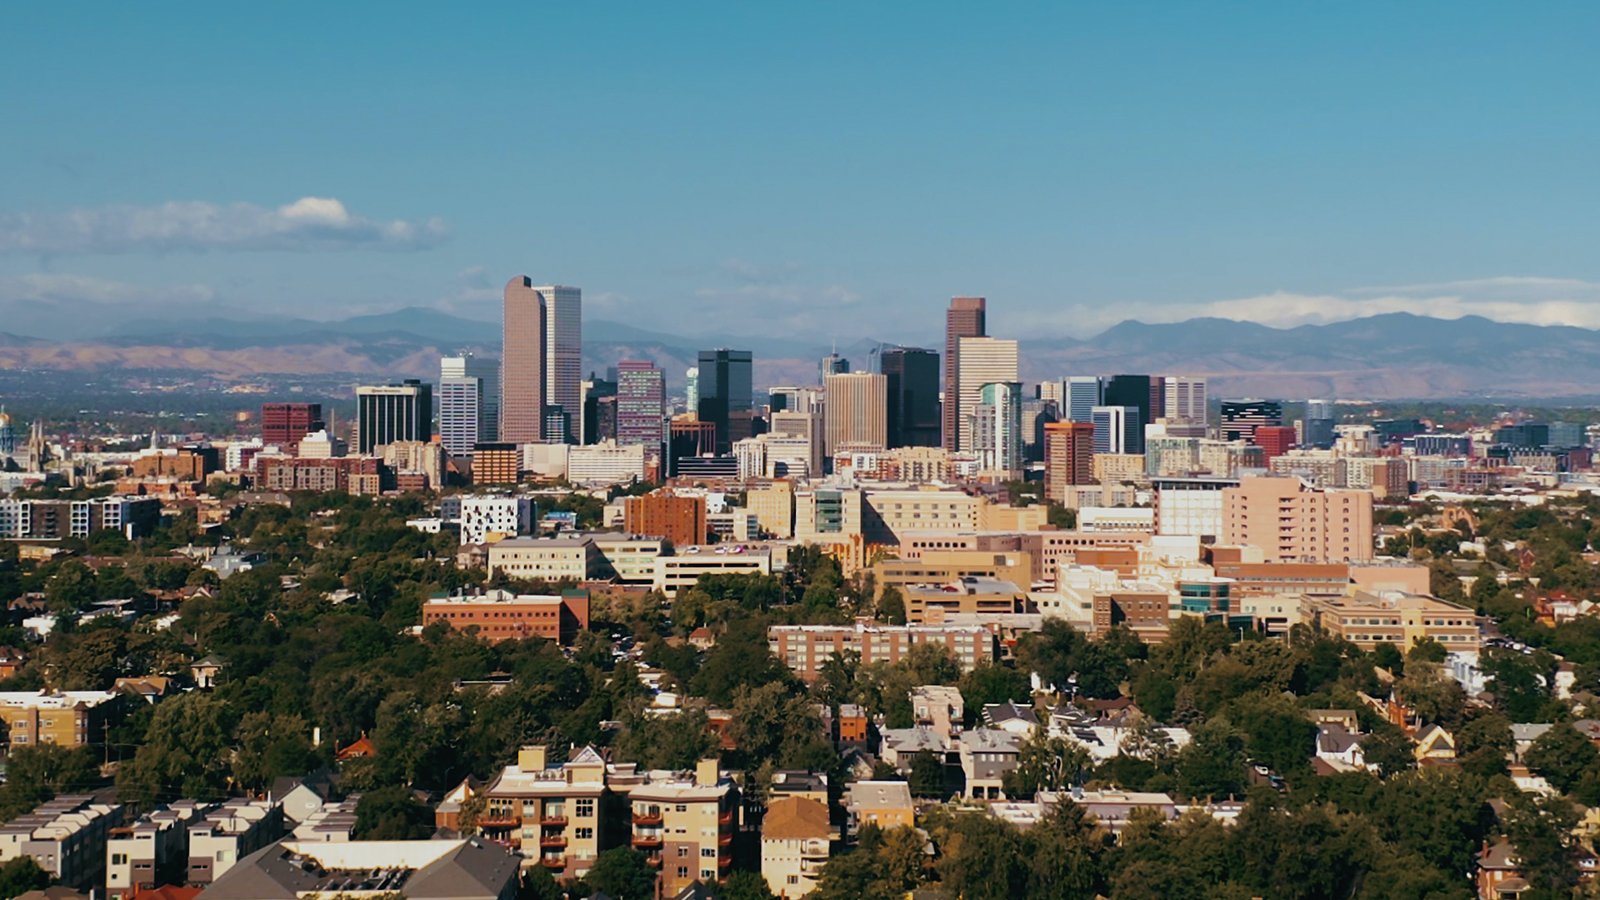 An image of downtown Denver with the Rocky Mountains in the background.